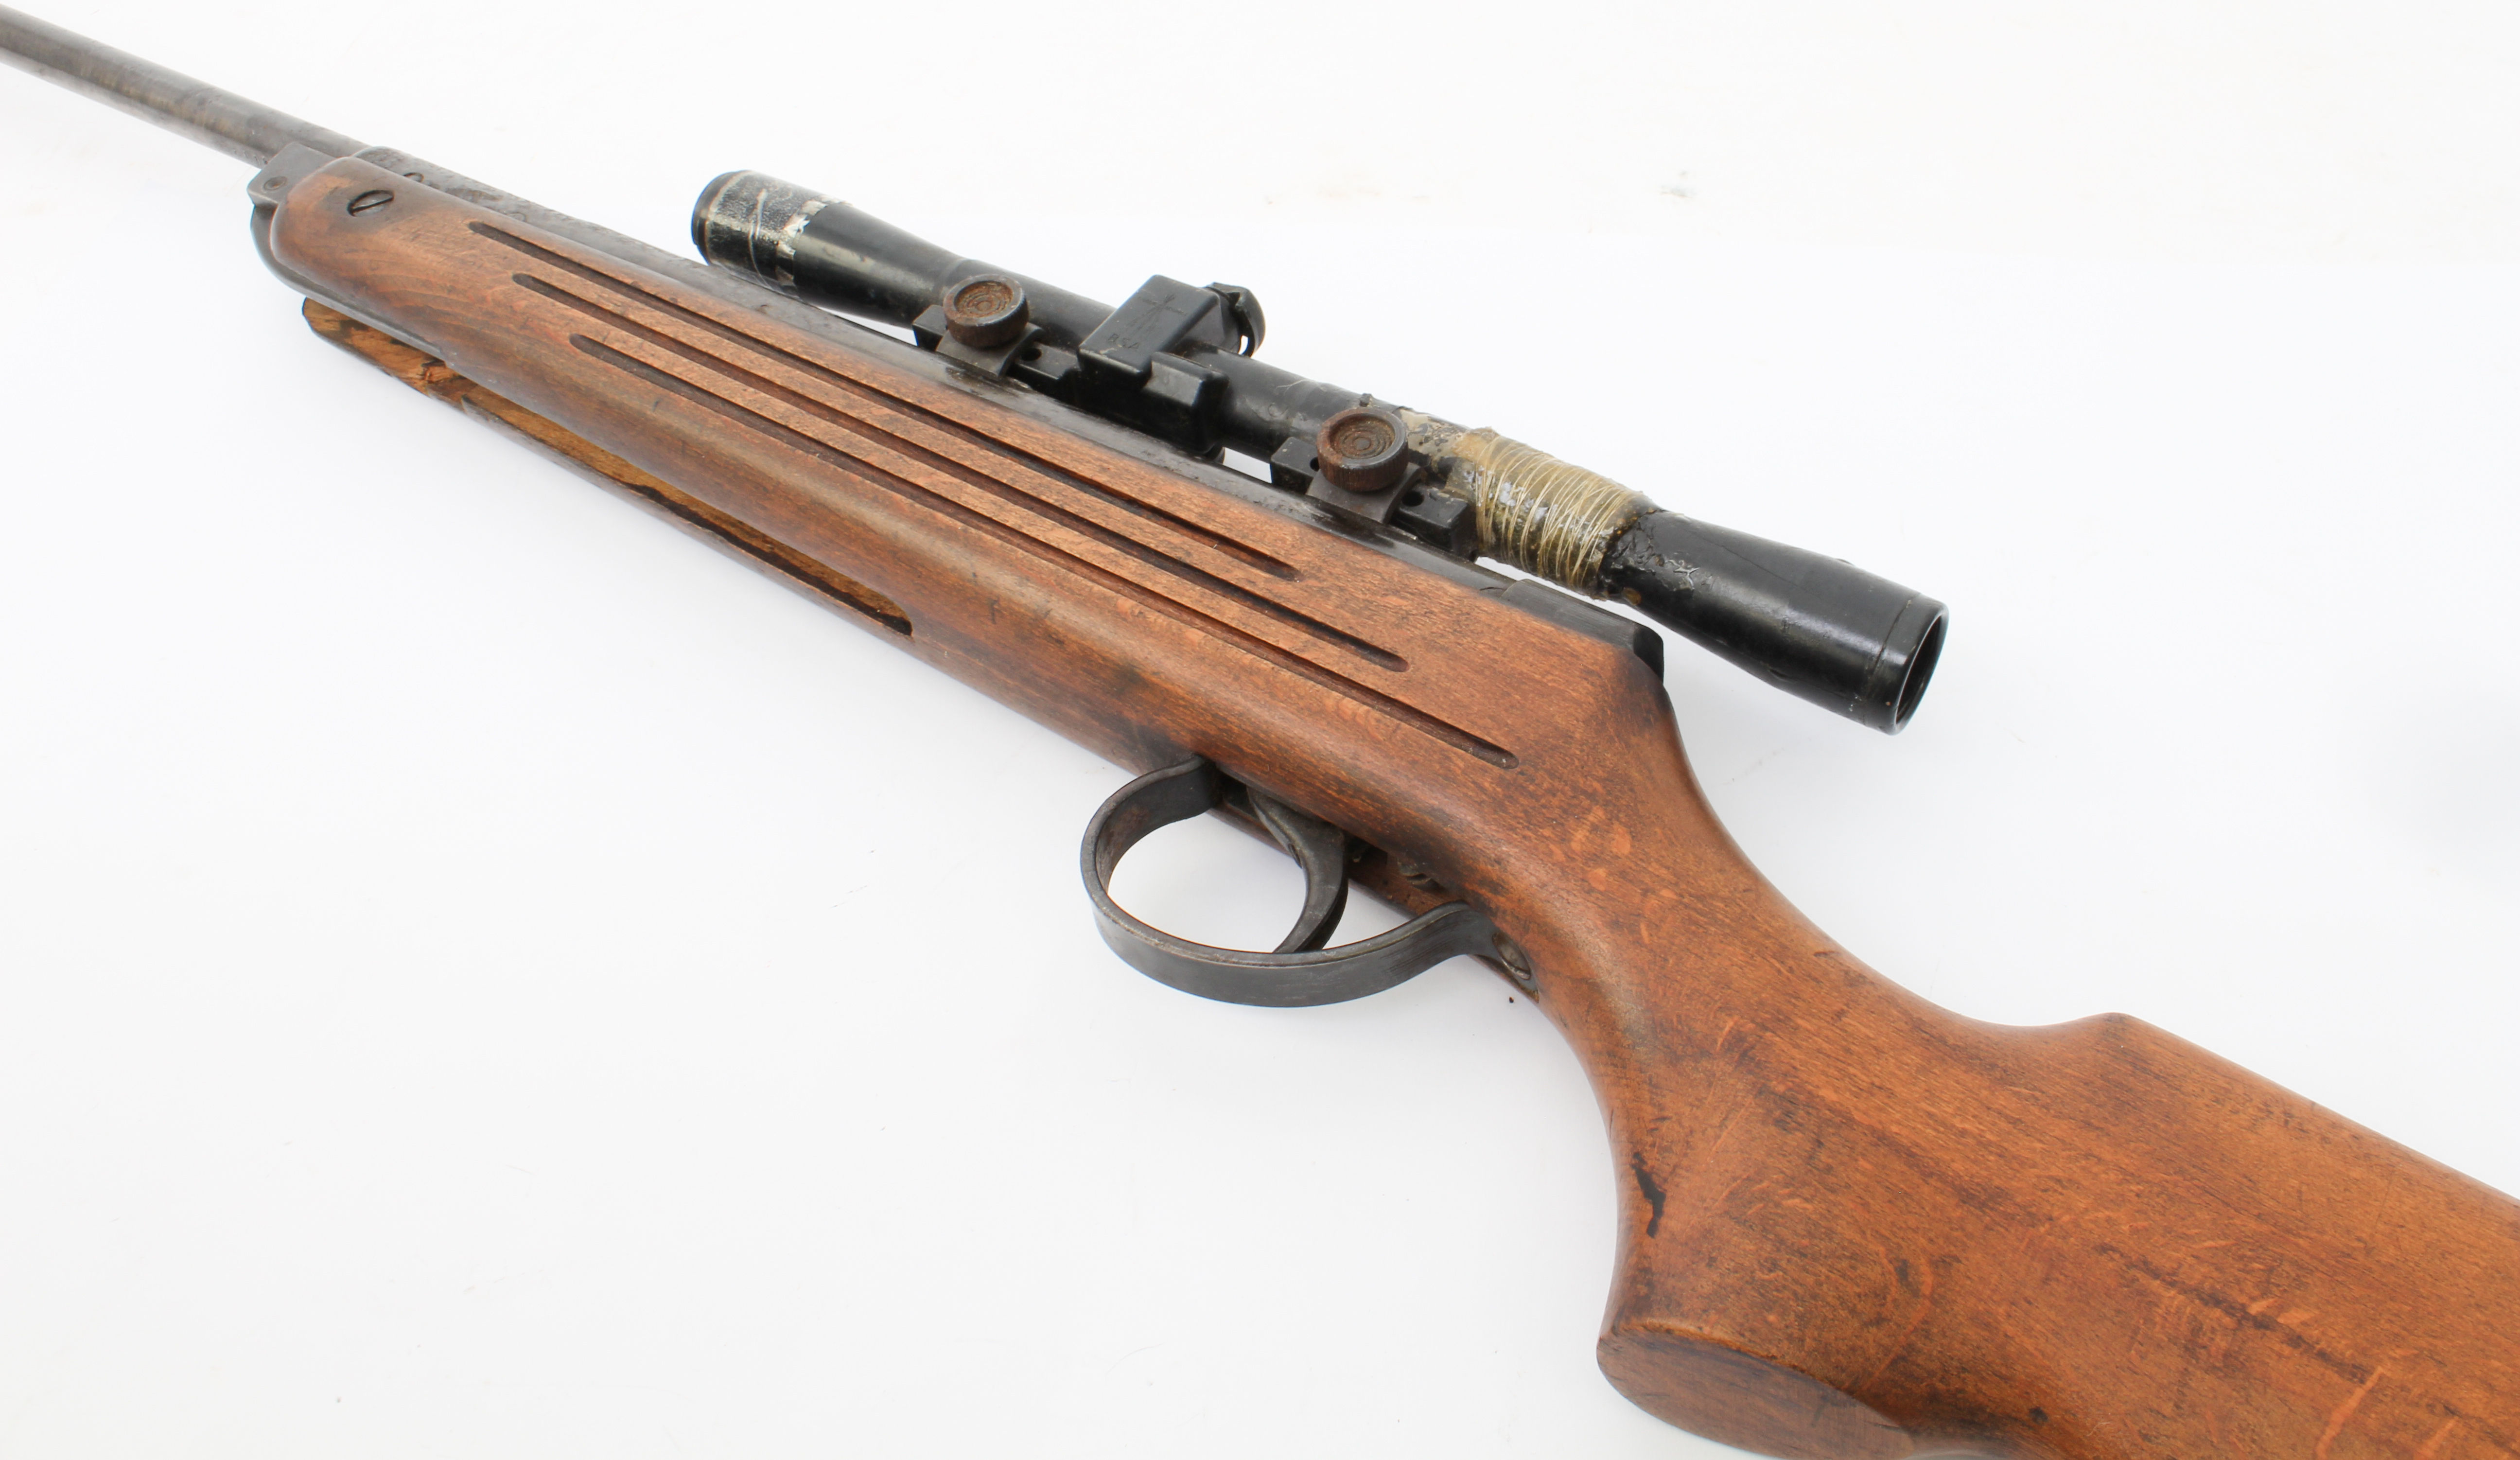 A BSA .177 air rifle (22119) with telescopic sight, 18" barrel and 13 3/4" stock